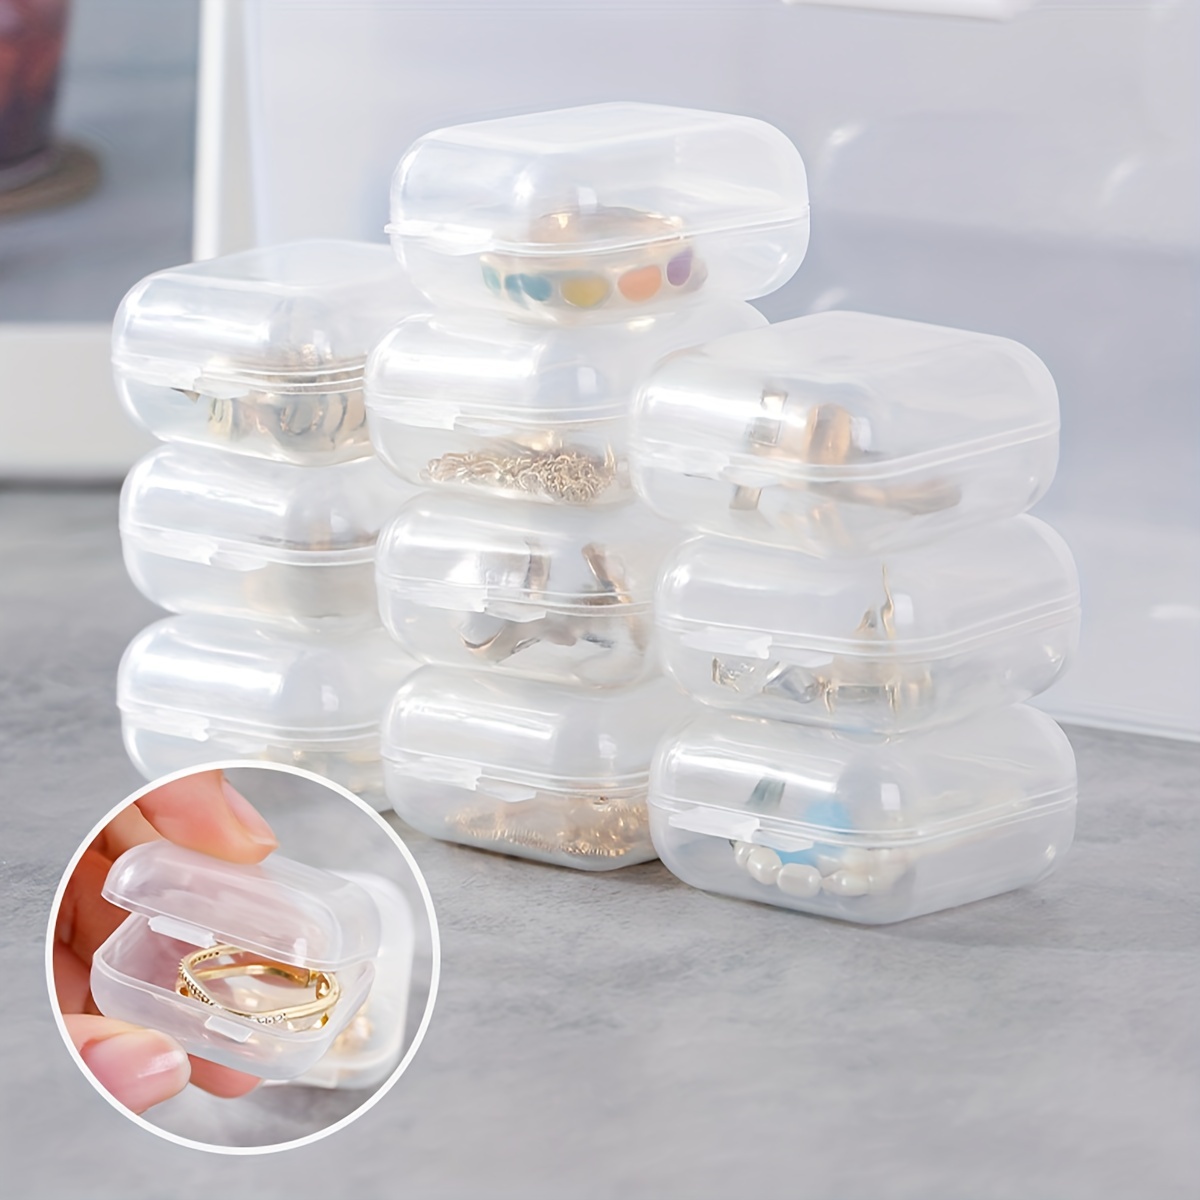 10pcs Mini Clear Plastic Storage Box, Jewelry Storage Case, Transparent  Storage Organizer, Multifunctional Portable Storage Containers With Lid,  For S